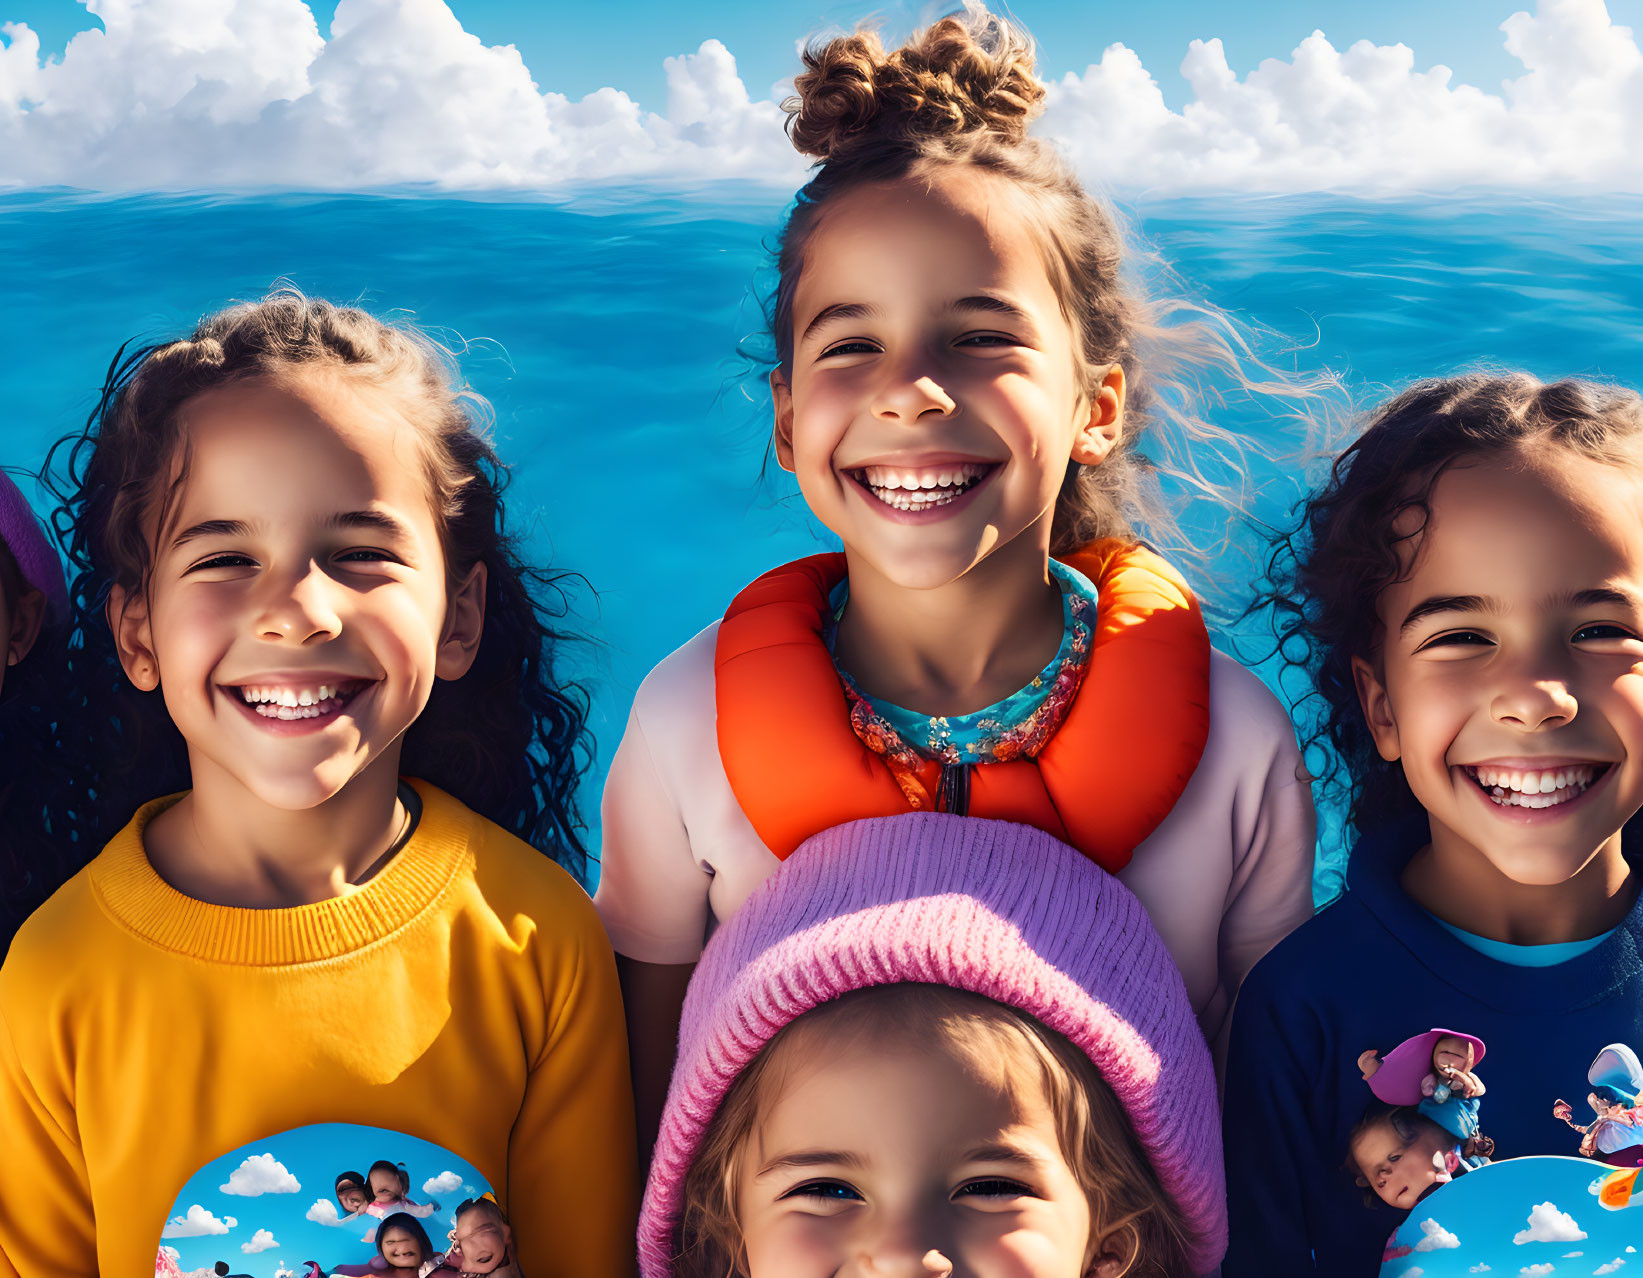 Four children in life vests on a boat under clear blue skies and ocean.